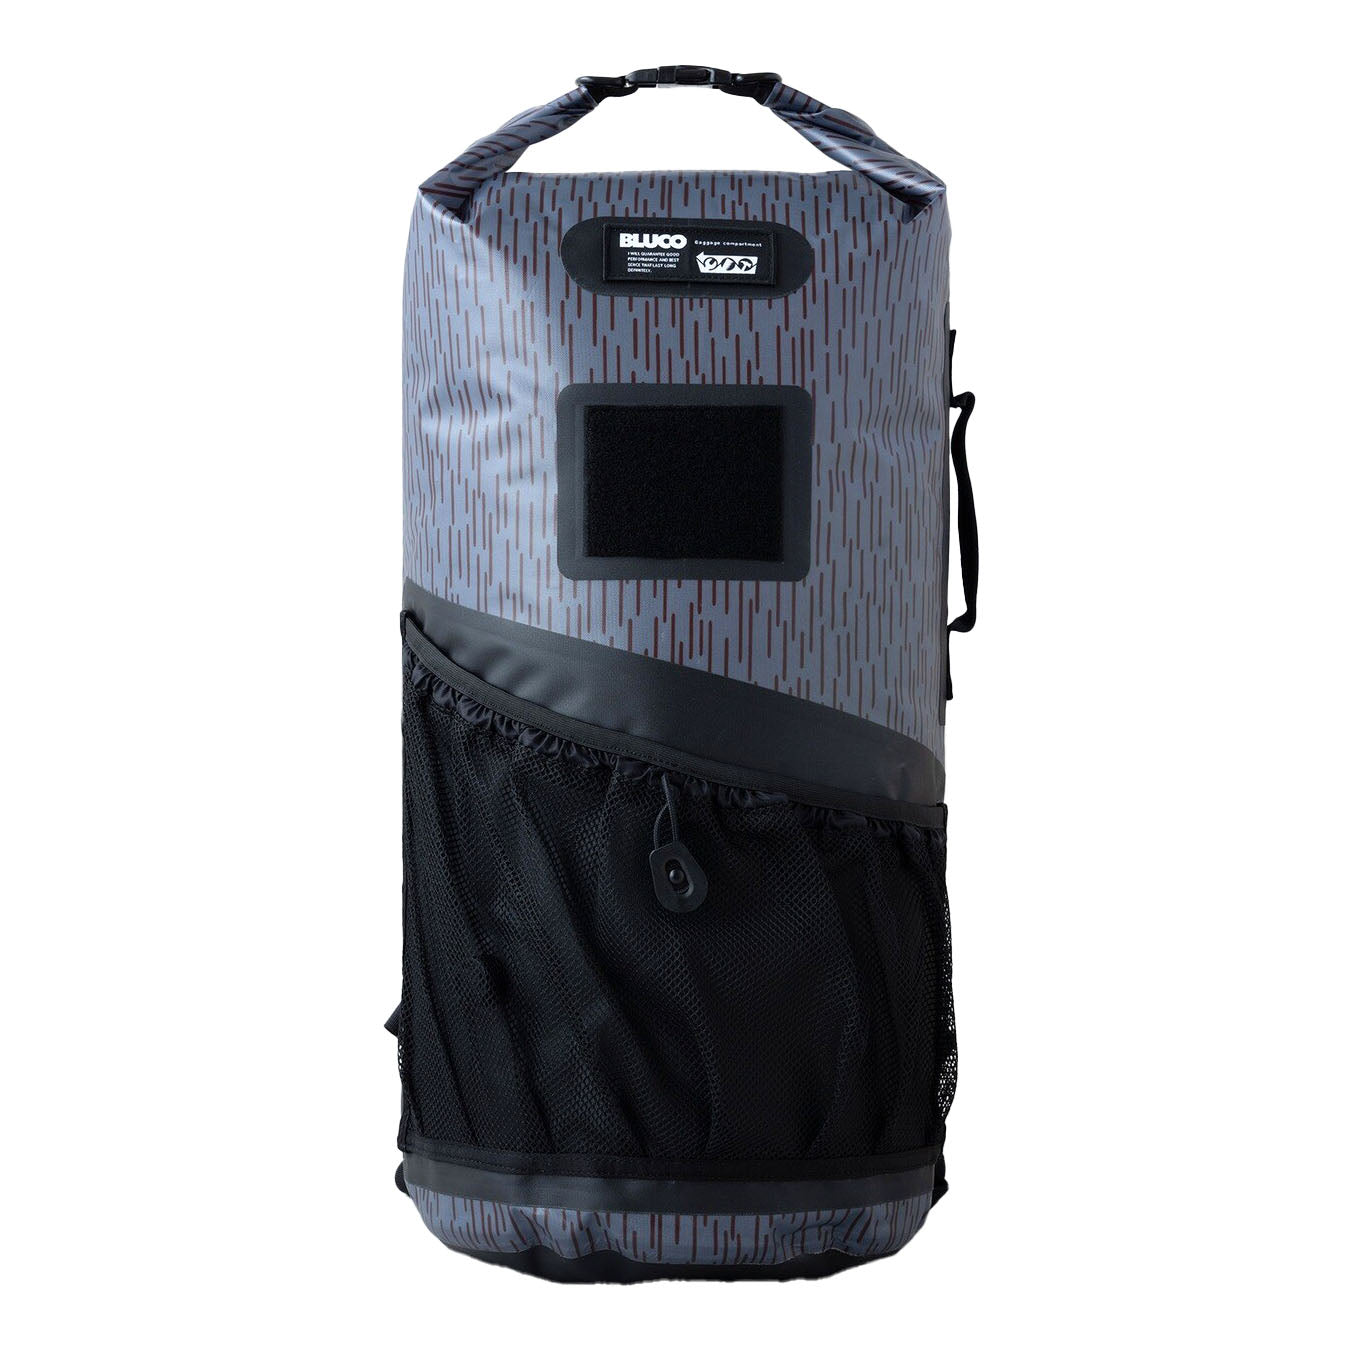 DRY BACKPACK - May club